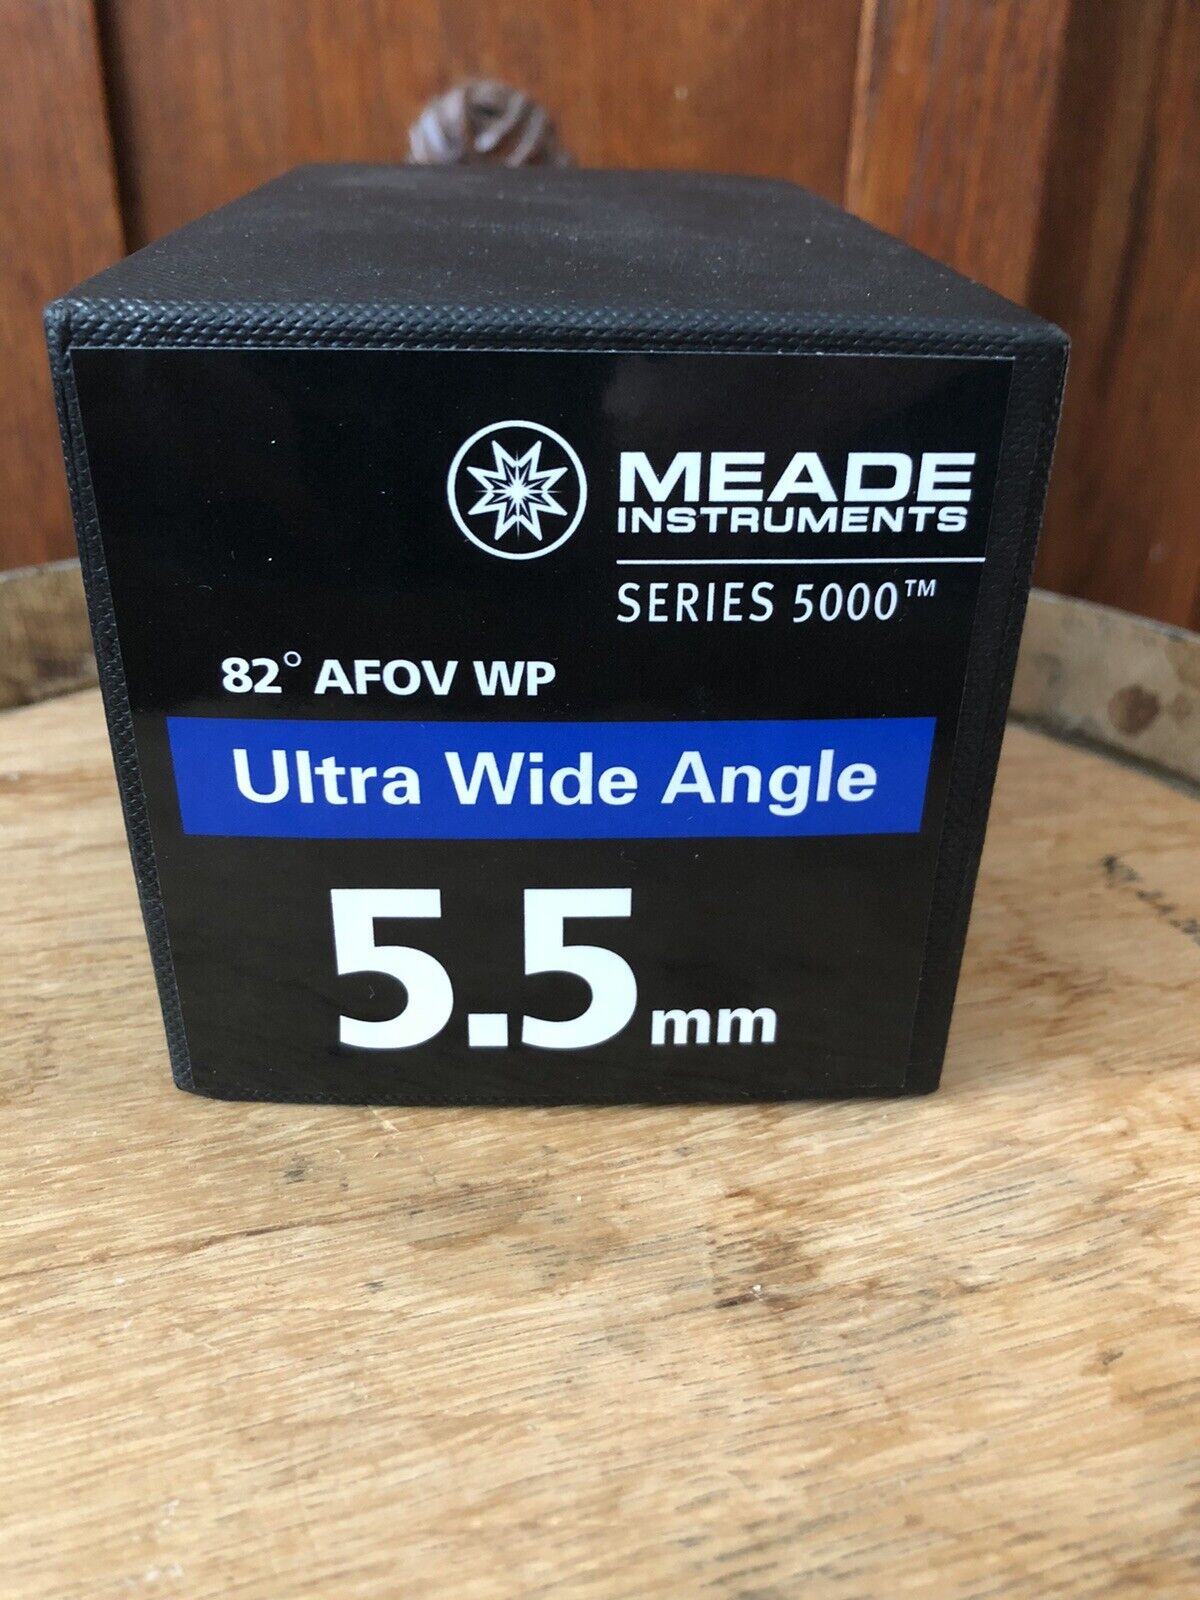 Meade Series 5000 Ultra Wide Angle 30mm Eyepiece 5.5mm